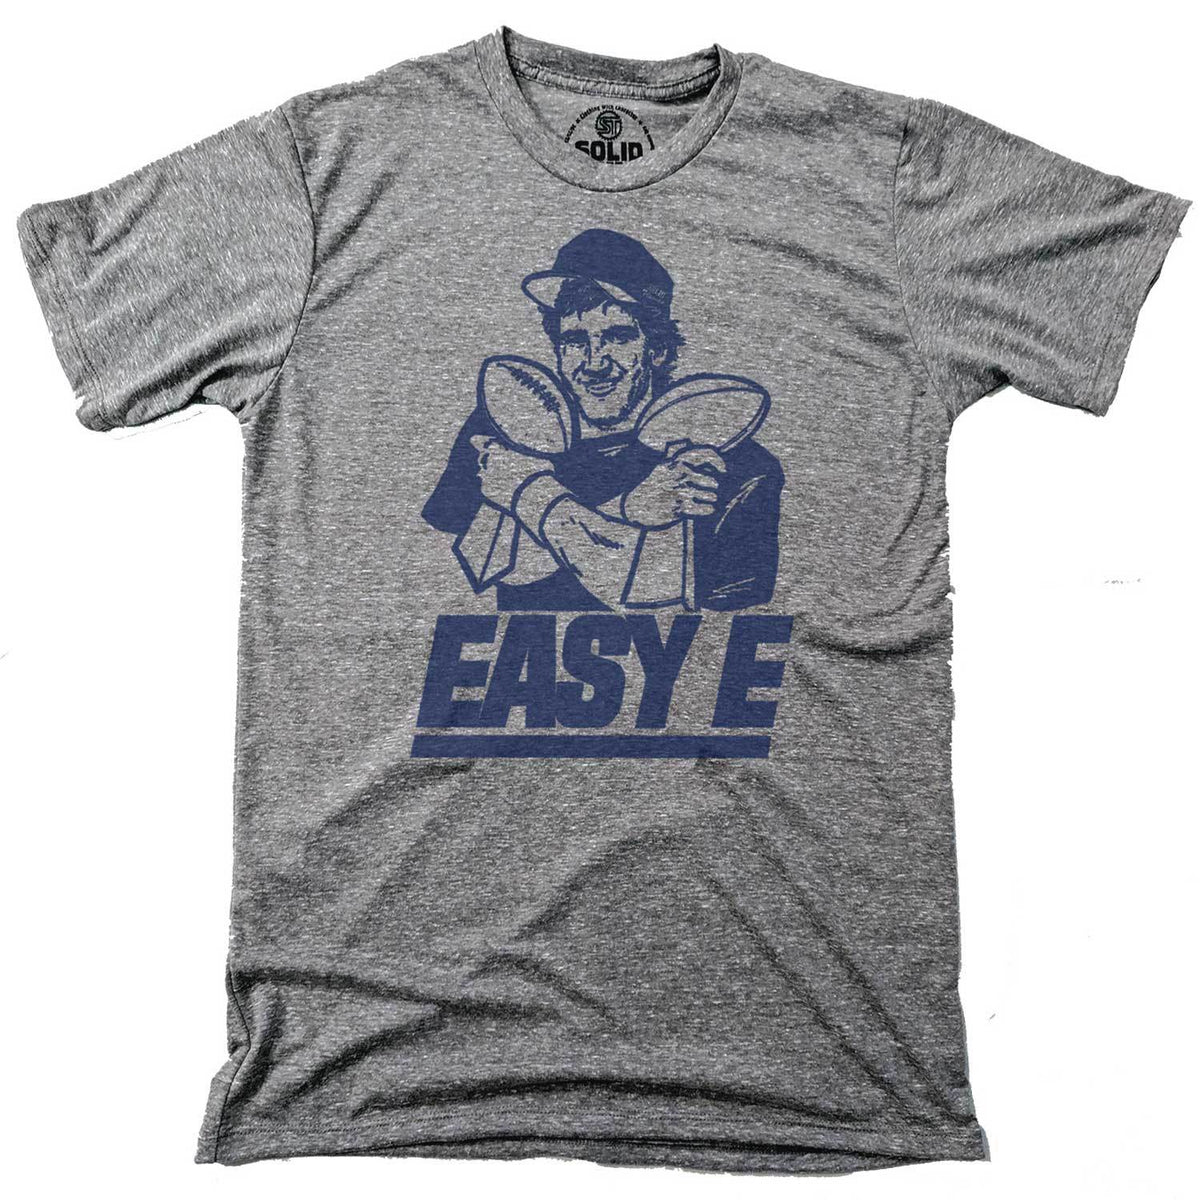 Solid Threads Women's Easy E Retro Graphic Tee | Funny NY Giants Eli Manning T-Shirt Triblend Grey / Medium